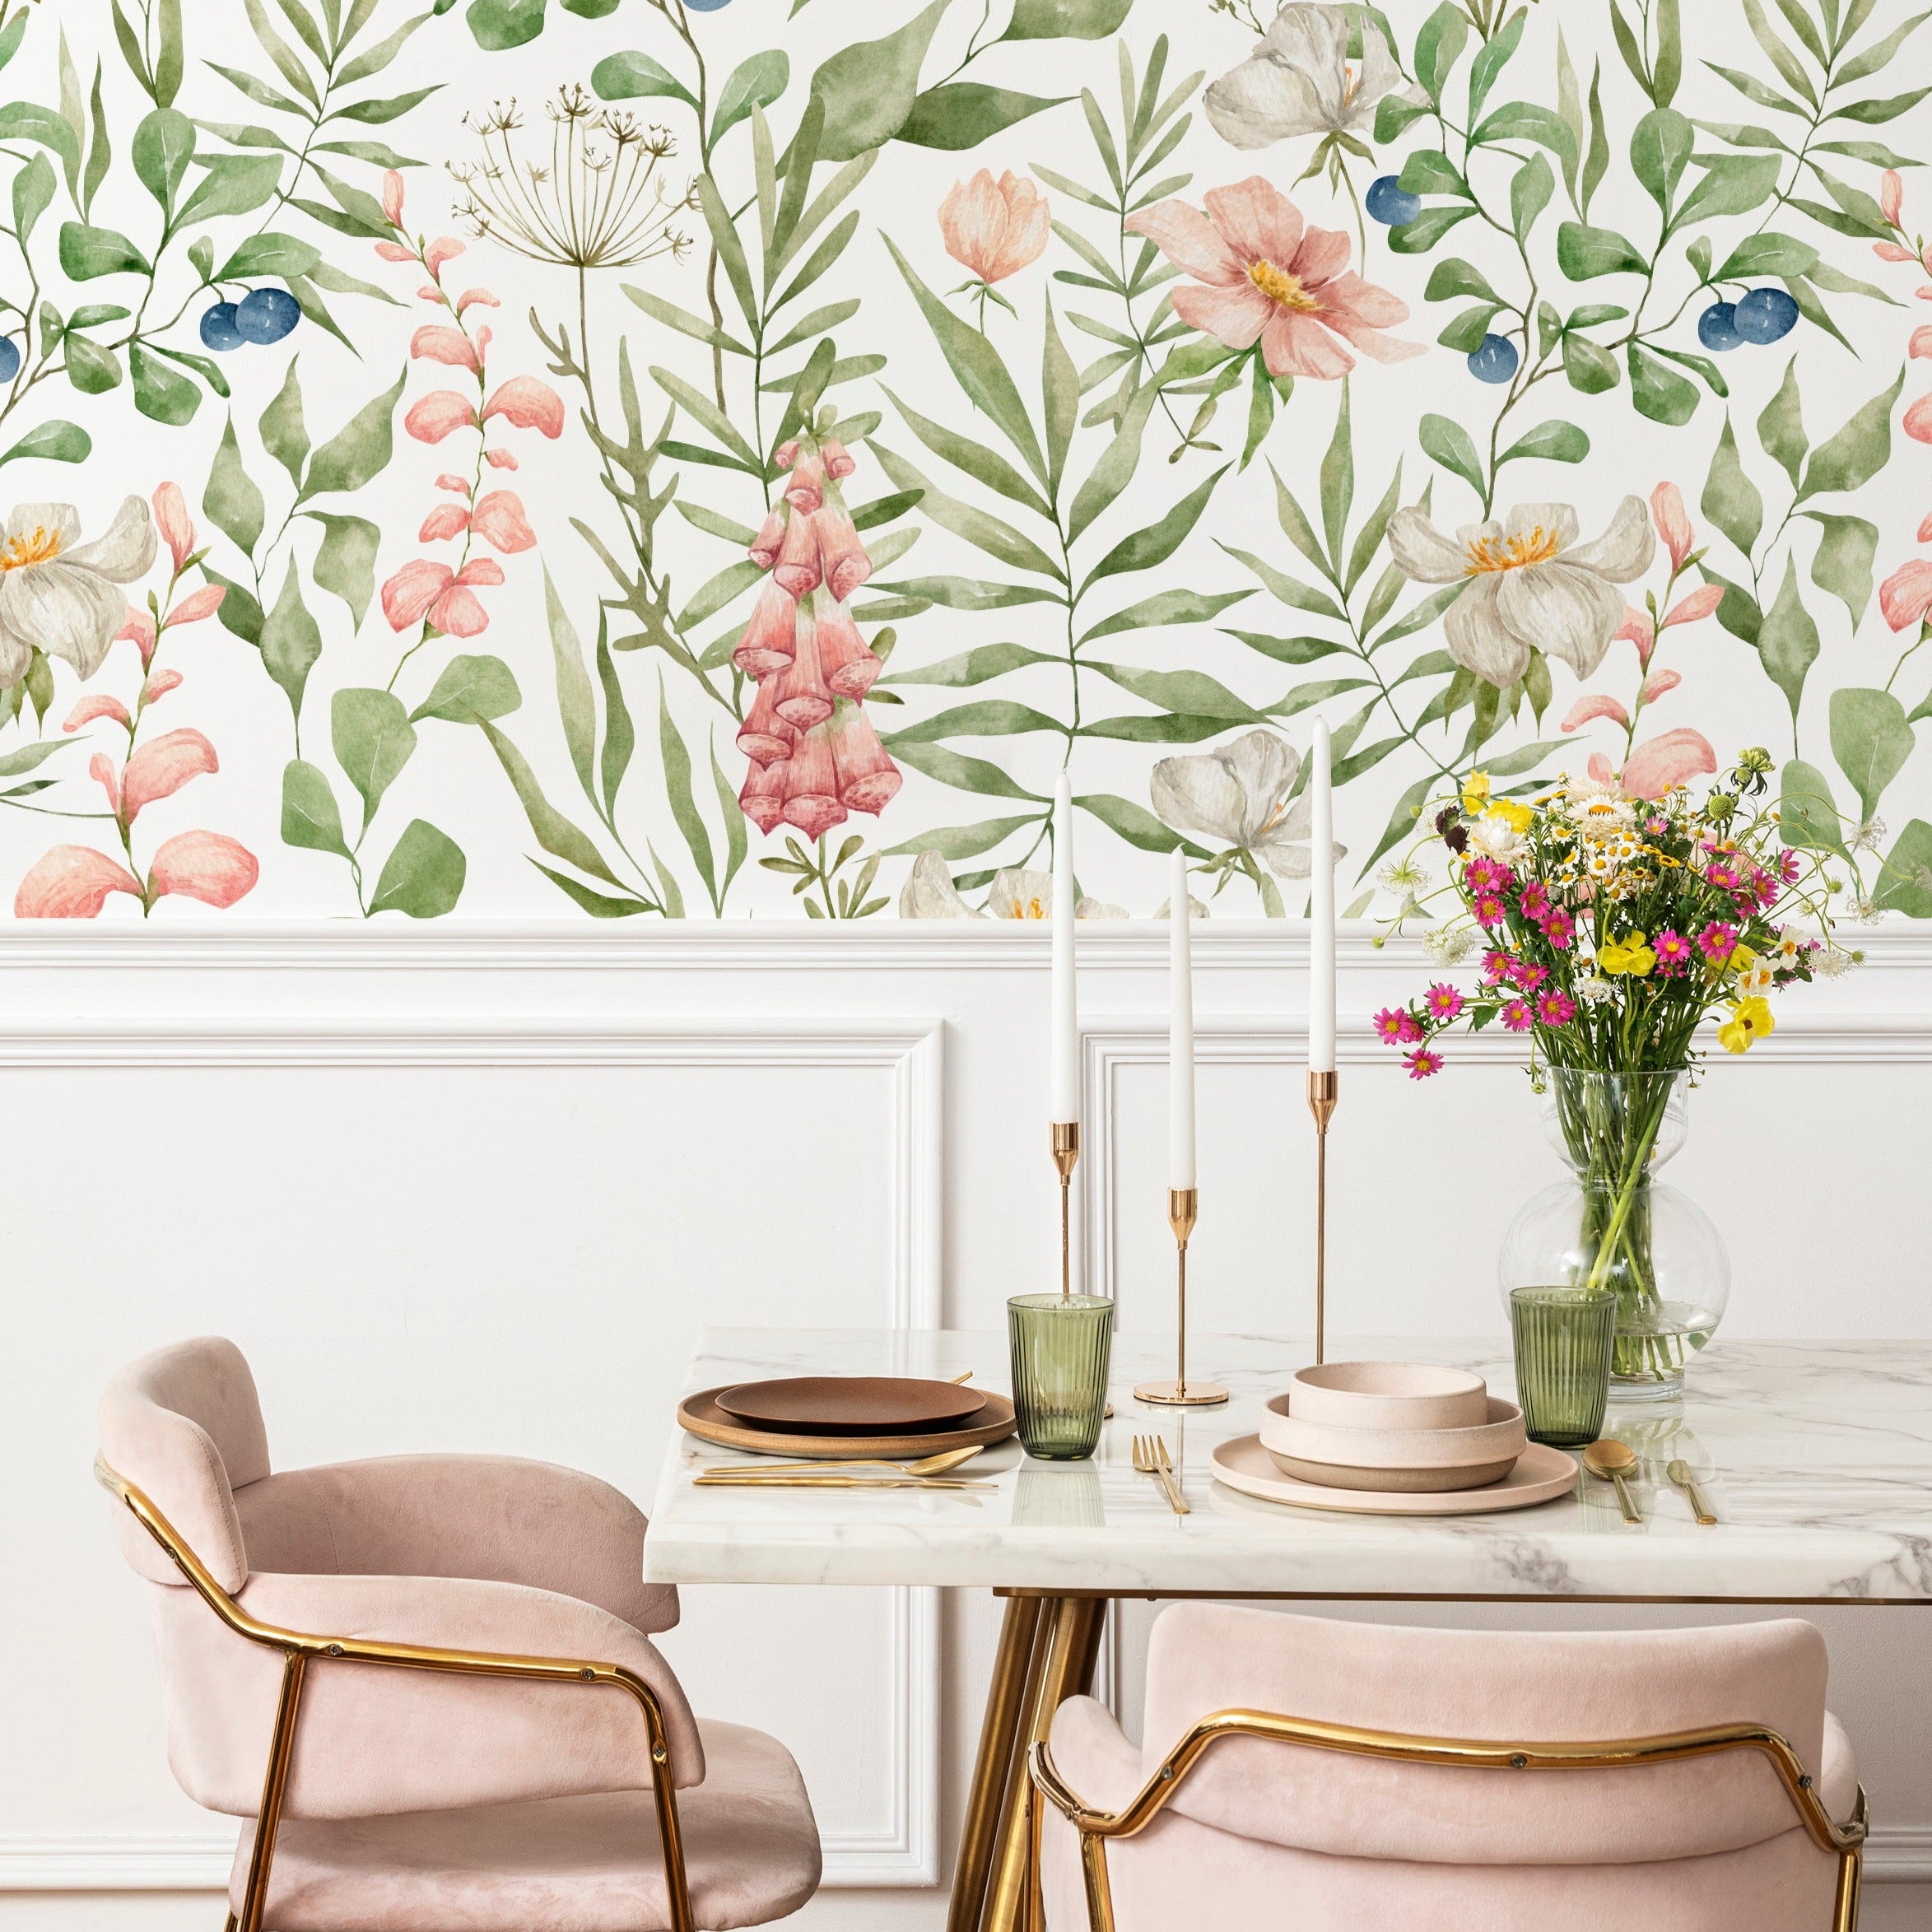 Elegant dining area enhanced by Watercolour Floral and Leaf Wallpaper II, with pastel floral patterns providing a soft backdrop to a modern table setting with pink chairs and a marble table.